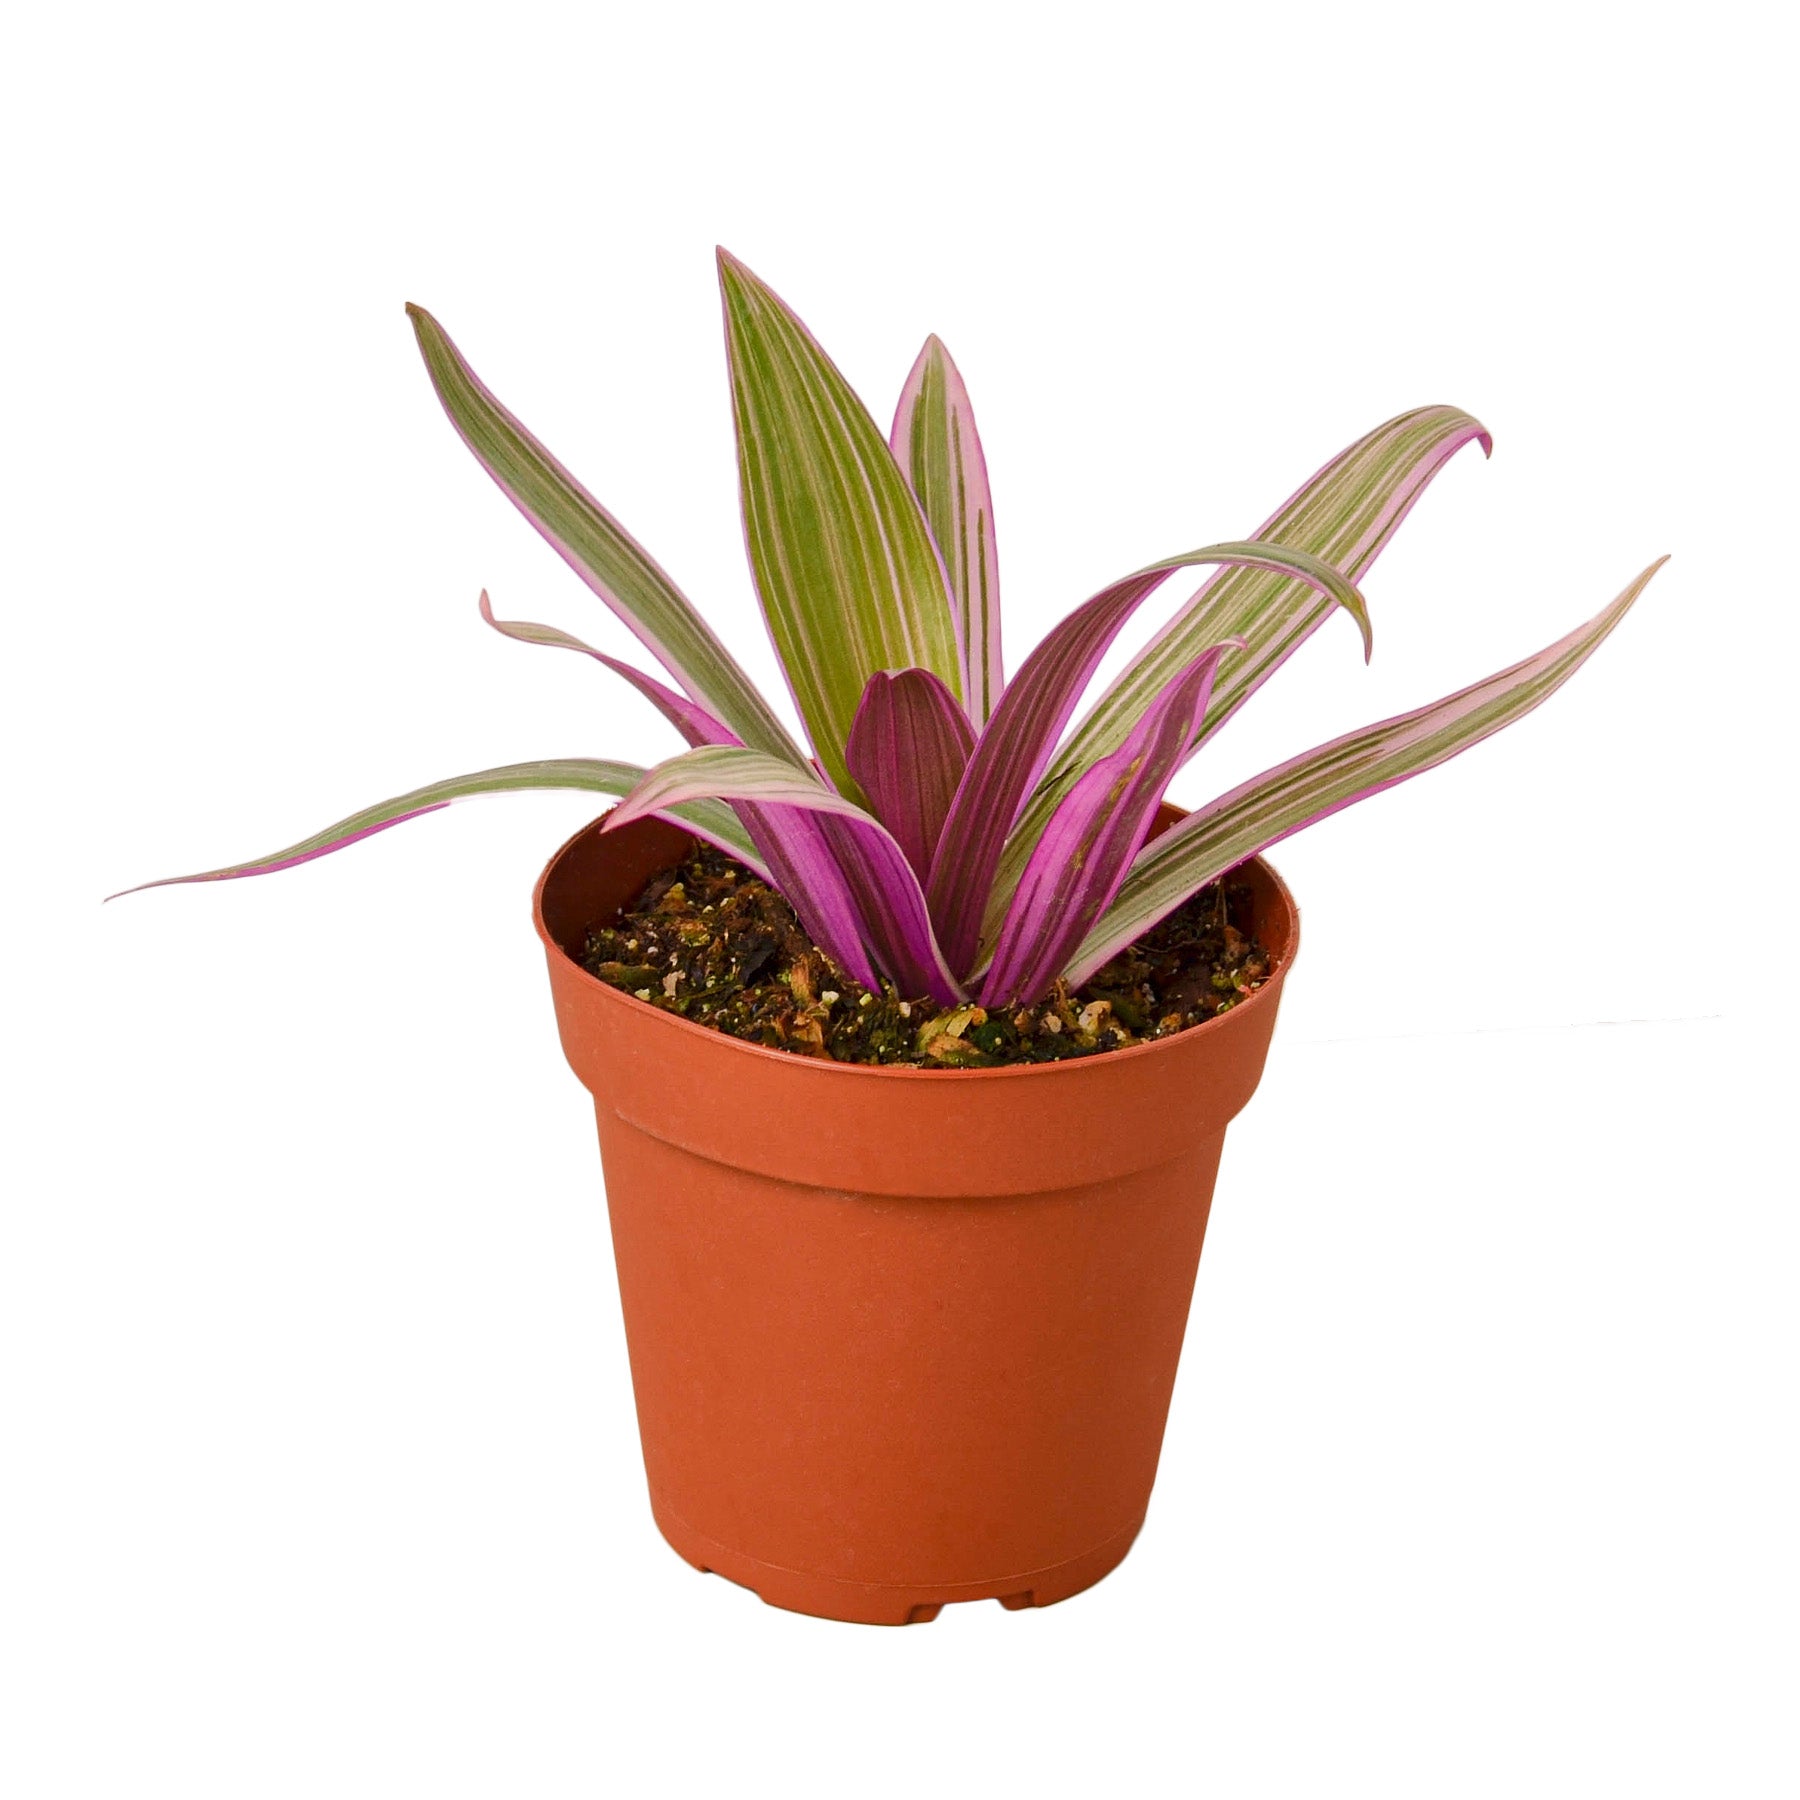 A purple plant in a pot on a white background at the best nursery near me.